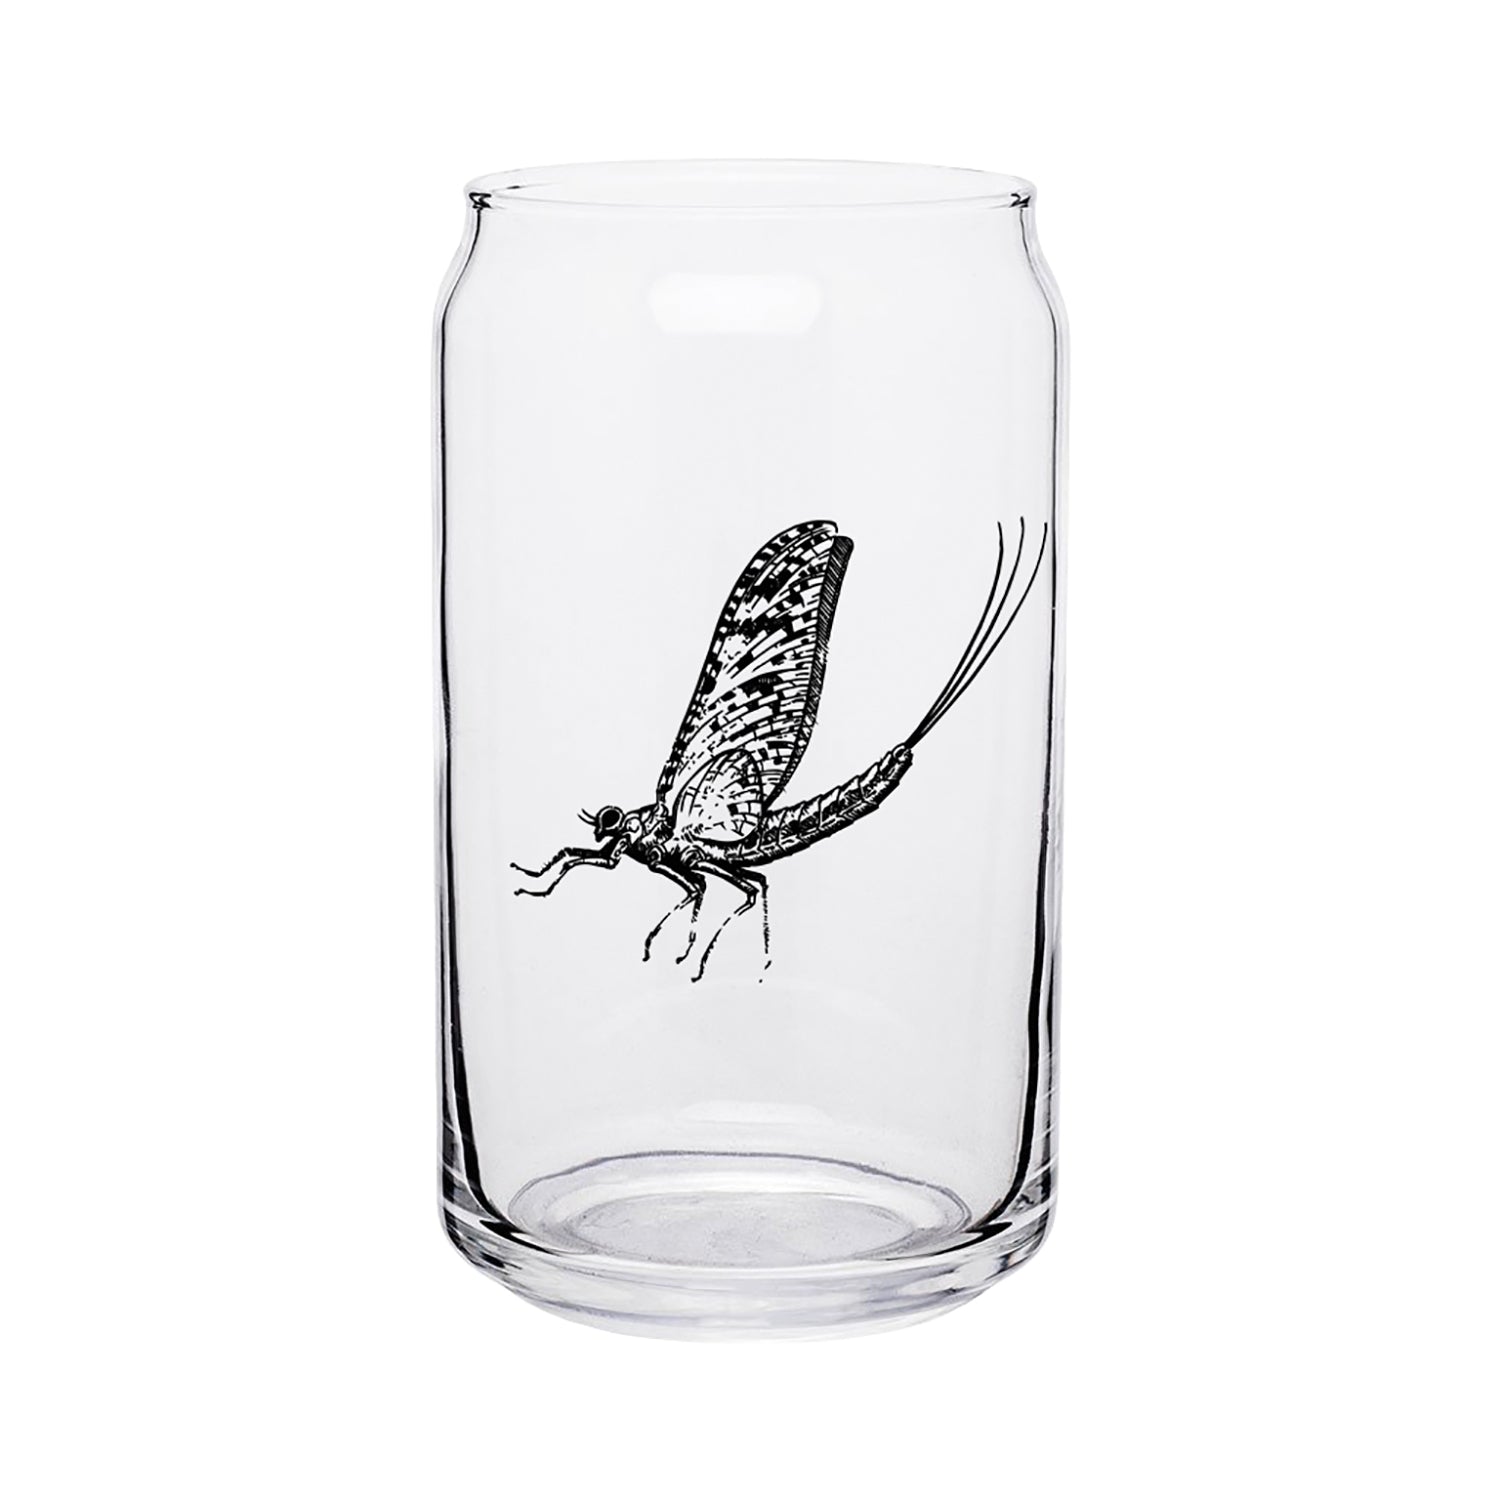 A glass shaped like a can has a drawing of a mayfly on it